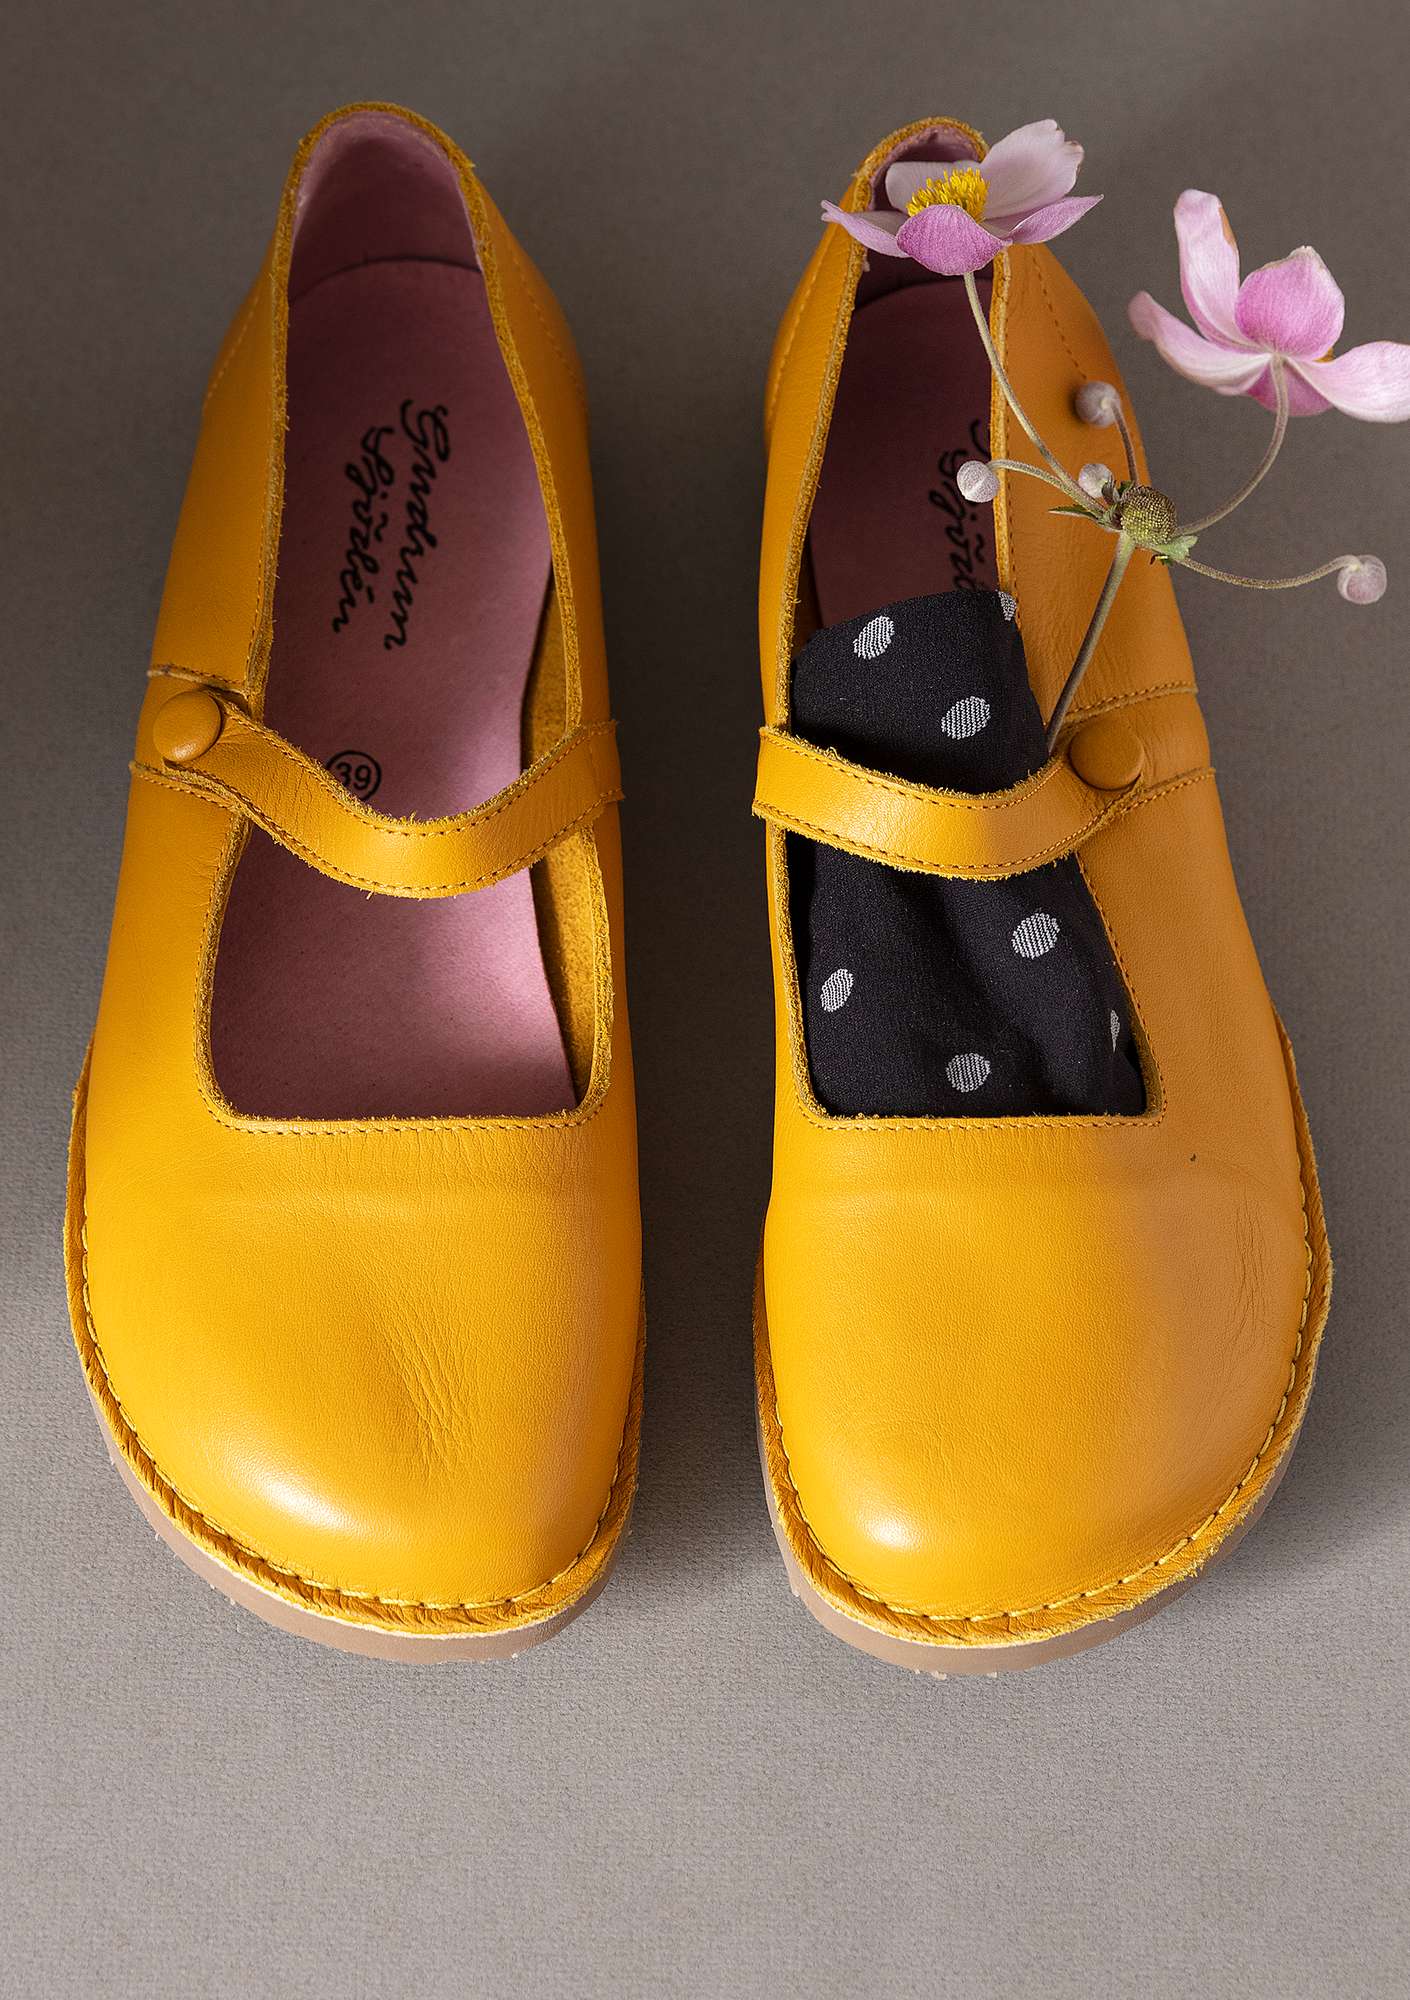 Strap shoes gold ochre